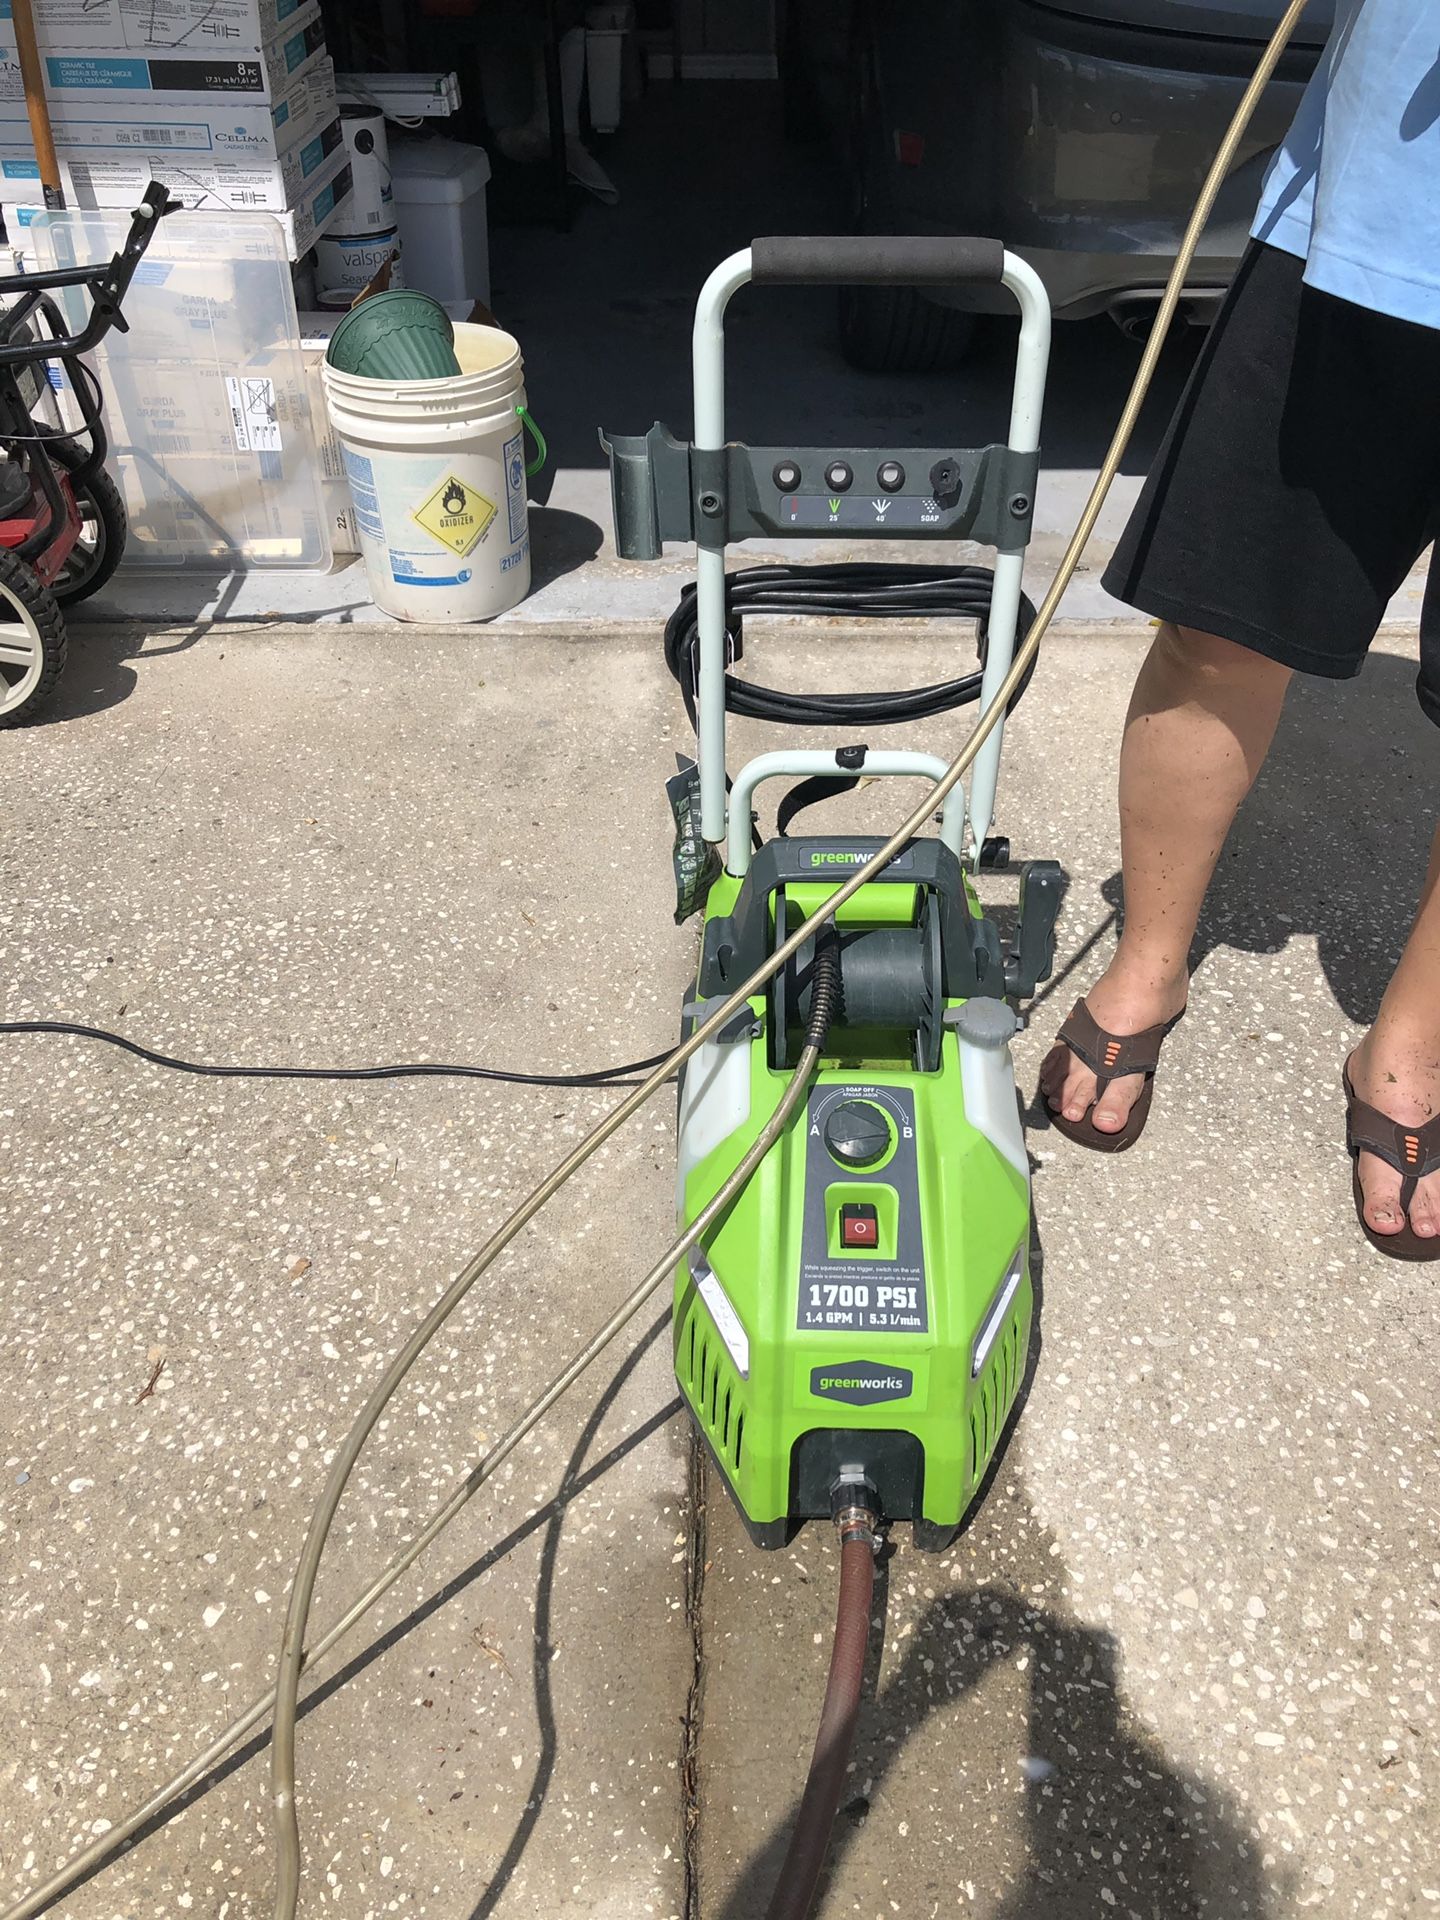 Electrical Pressure washer